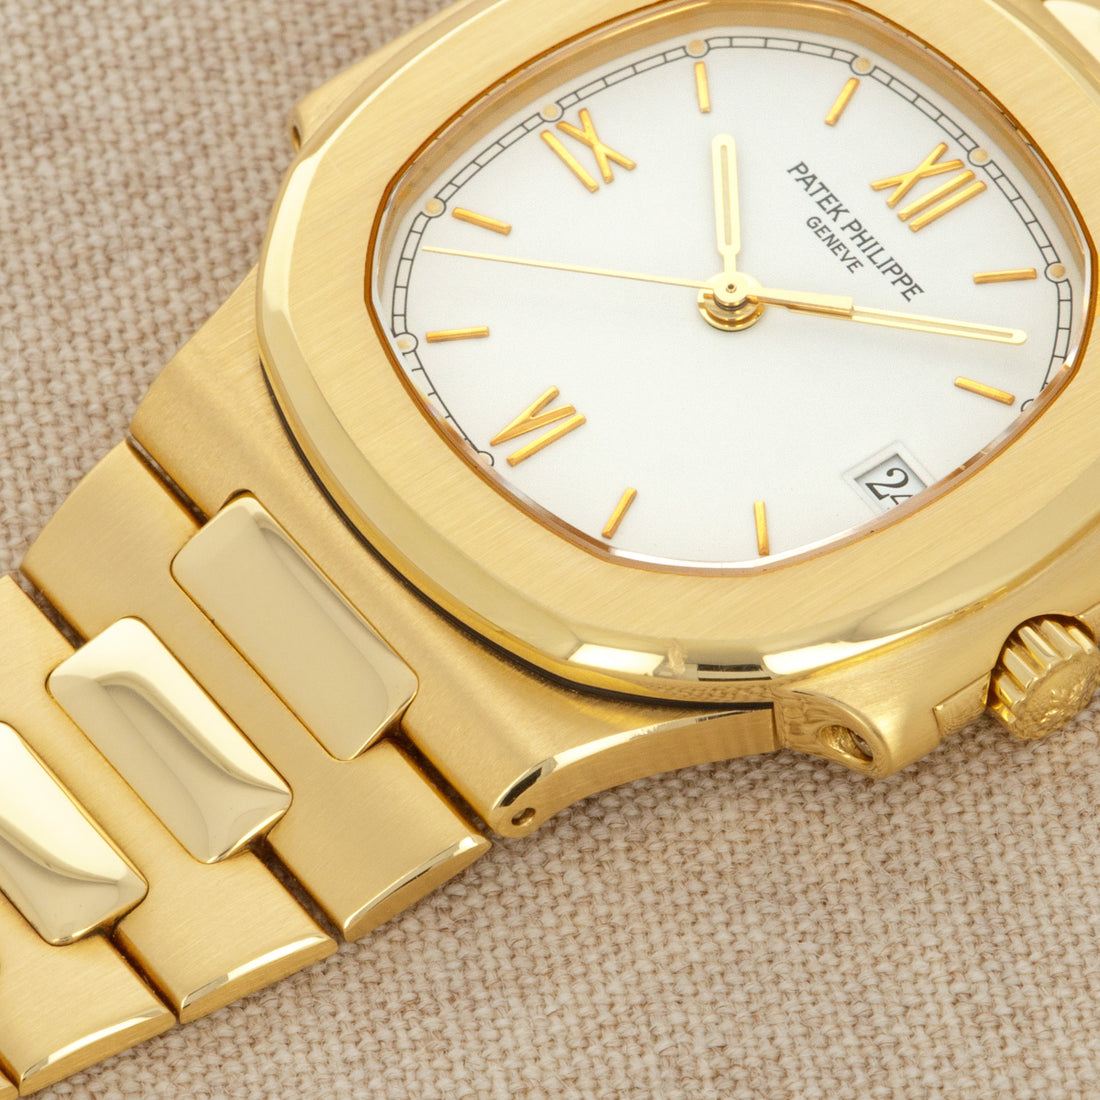 Patek Philippe Yellow Gold Nautilus Watch Ref. 3800 with Rare White Roman Numerals Dial